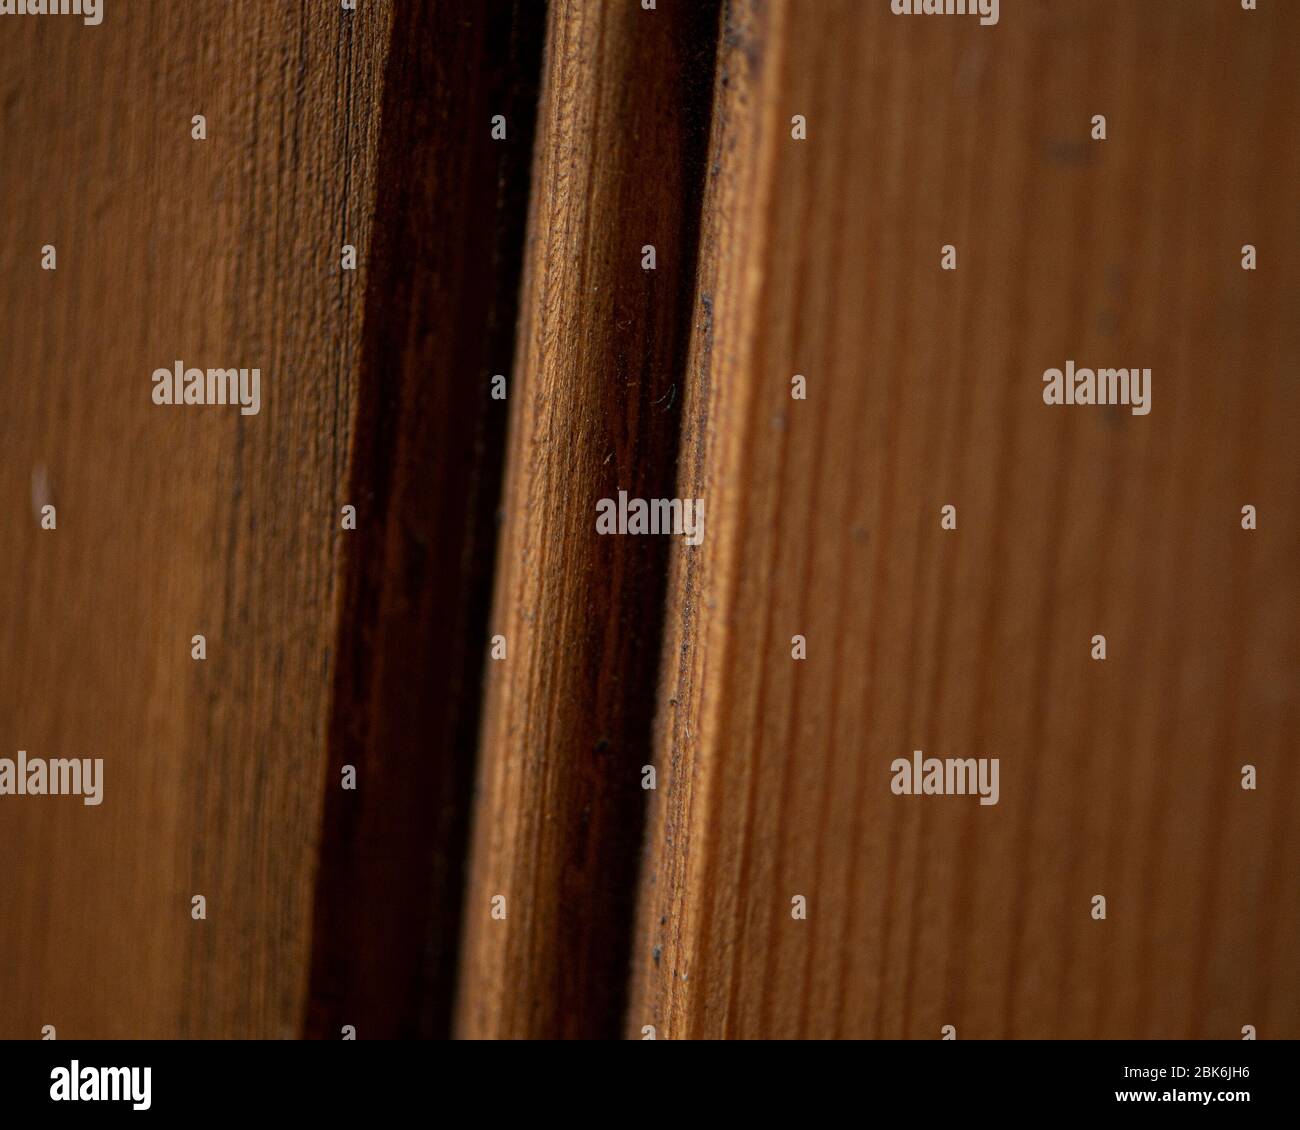 pine wood tongue and groove close up Stock Photo